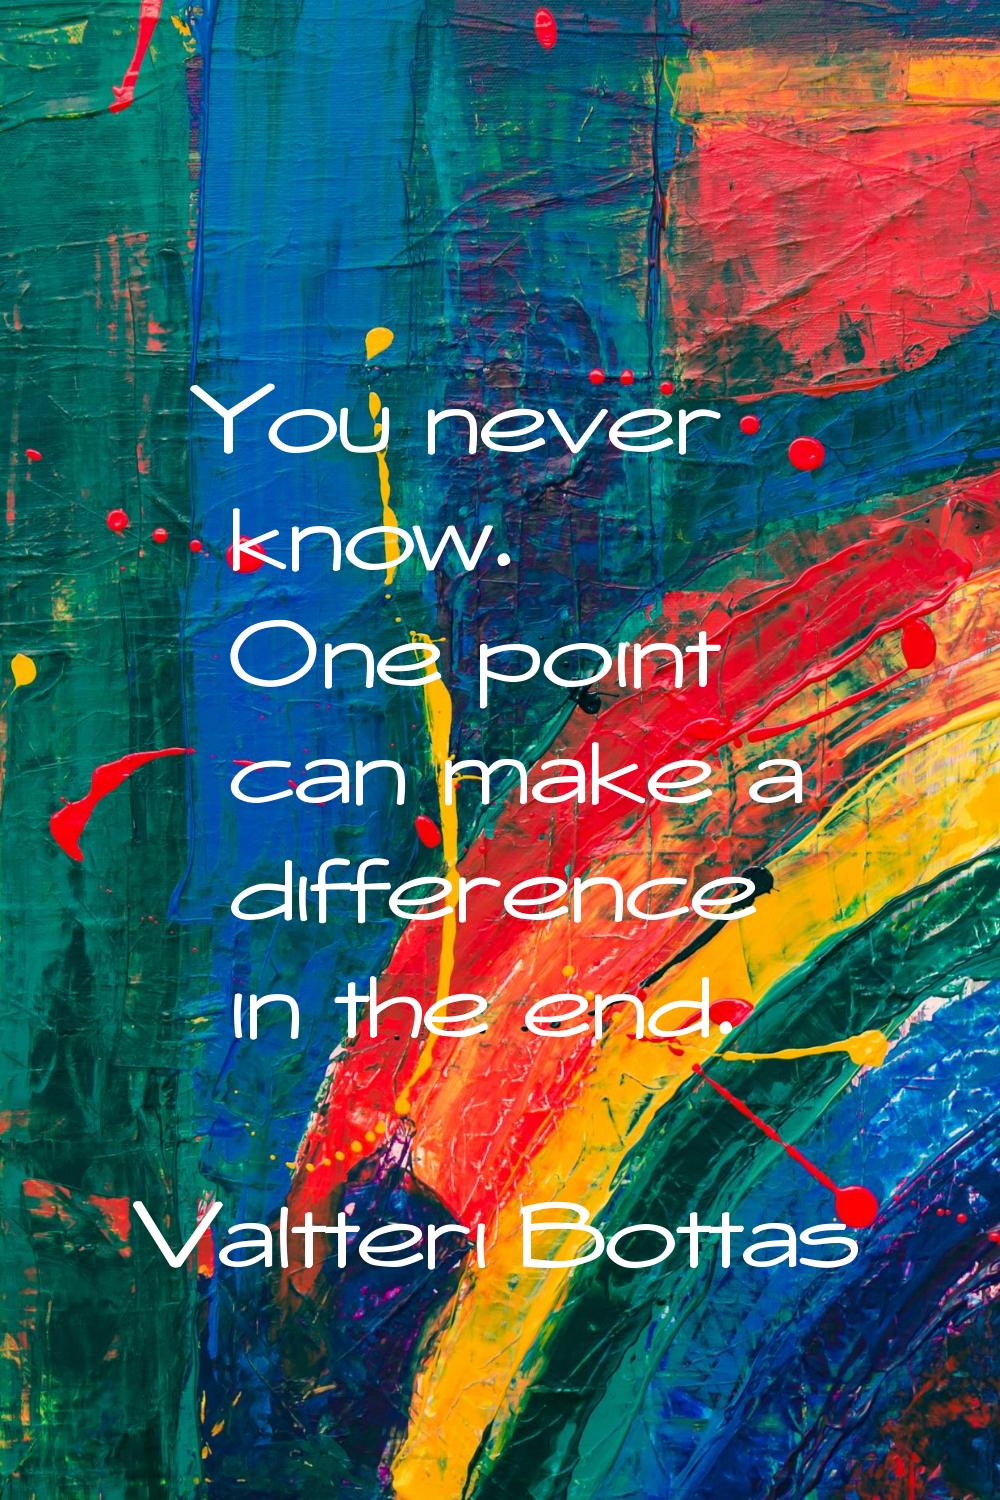 You never know. One point can make a difference in the end.